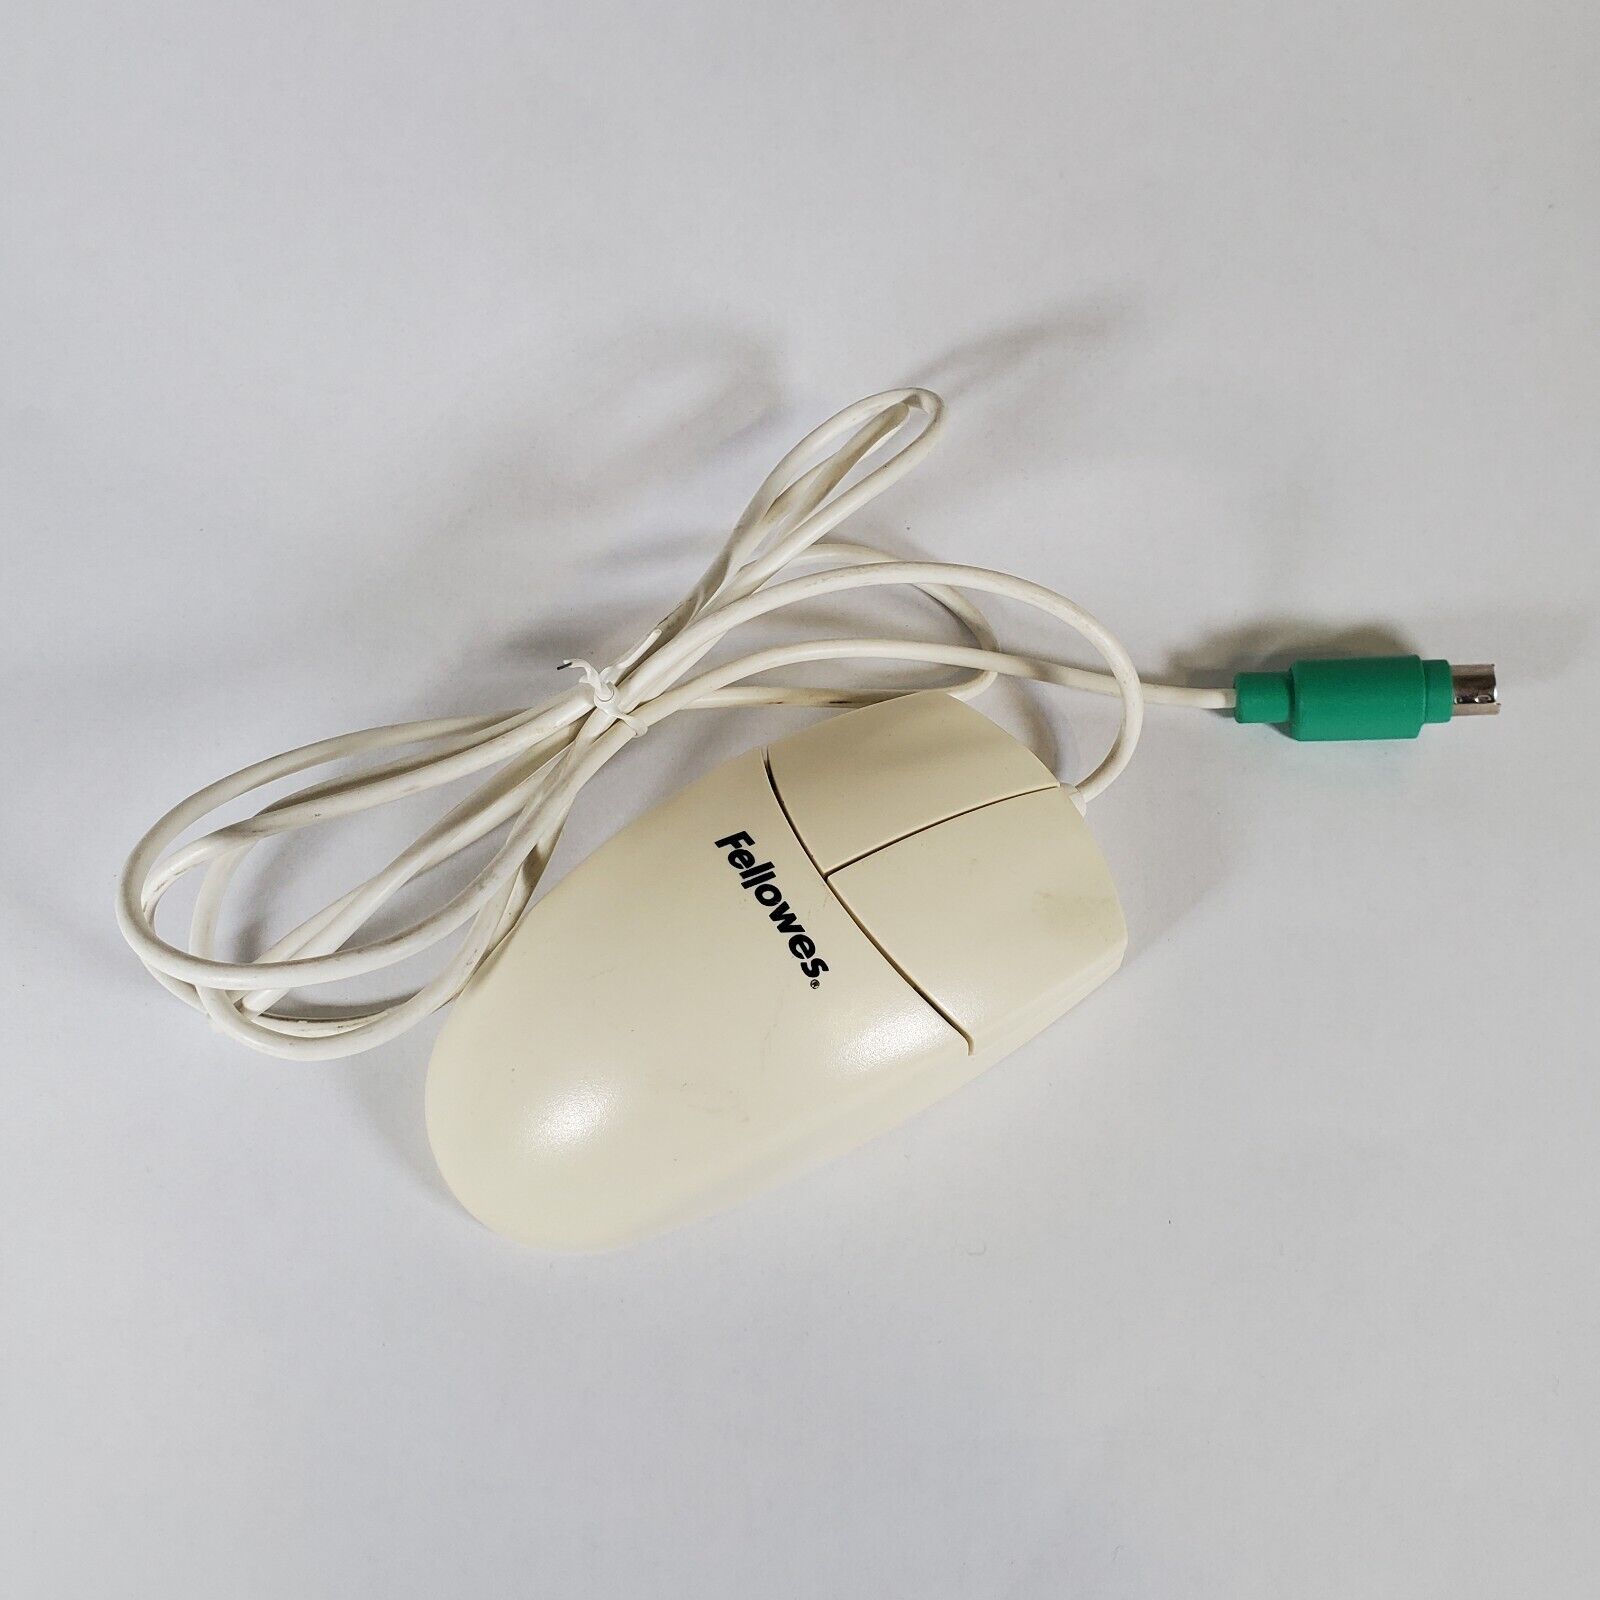 Fellowes 2-Button Mouse (99939) - PC Mouse ONLY Tested Beige Track Ball Vintage